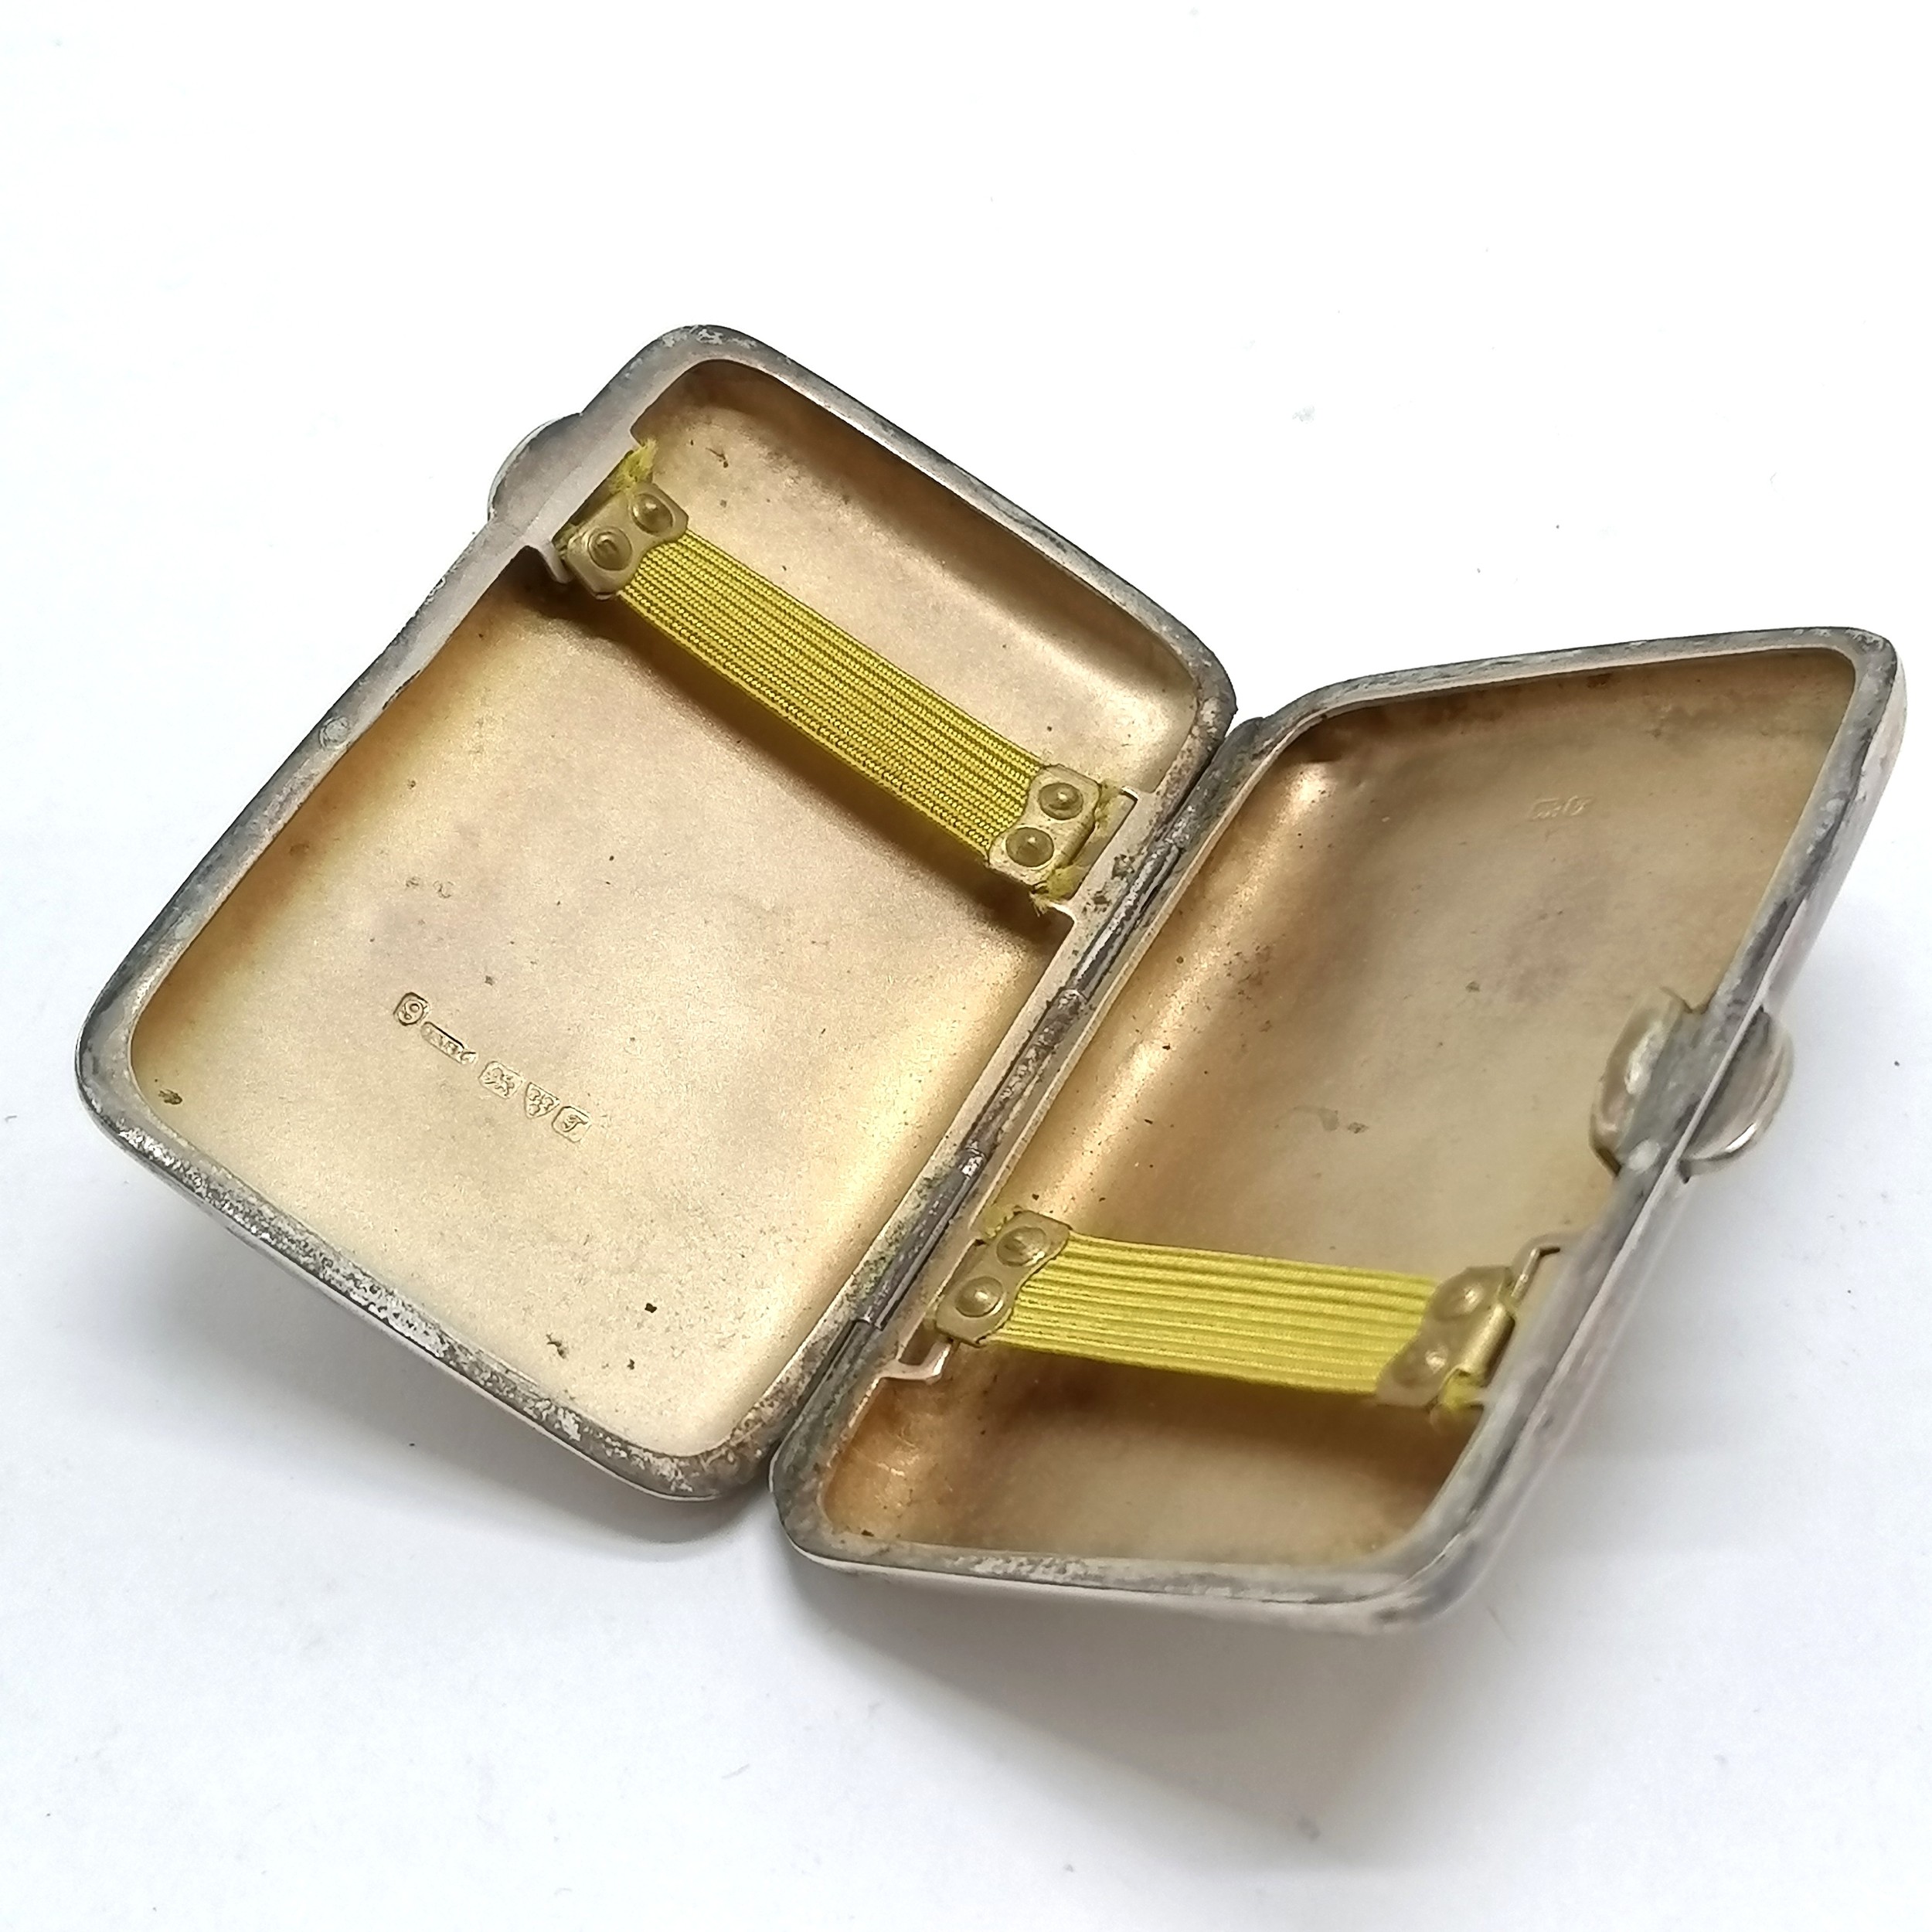 1919 engraved cigarettes case by J & R Griffin (8cm x 5.5cm) t/w American sterling silver butter - Image 3 of 3